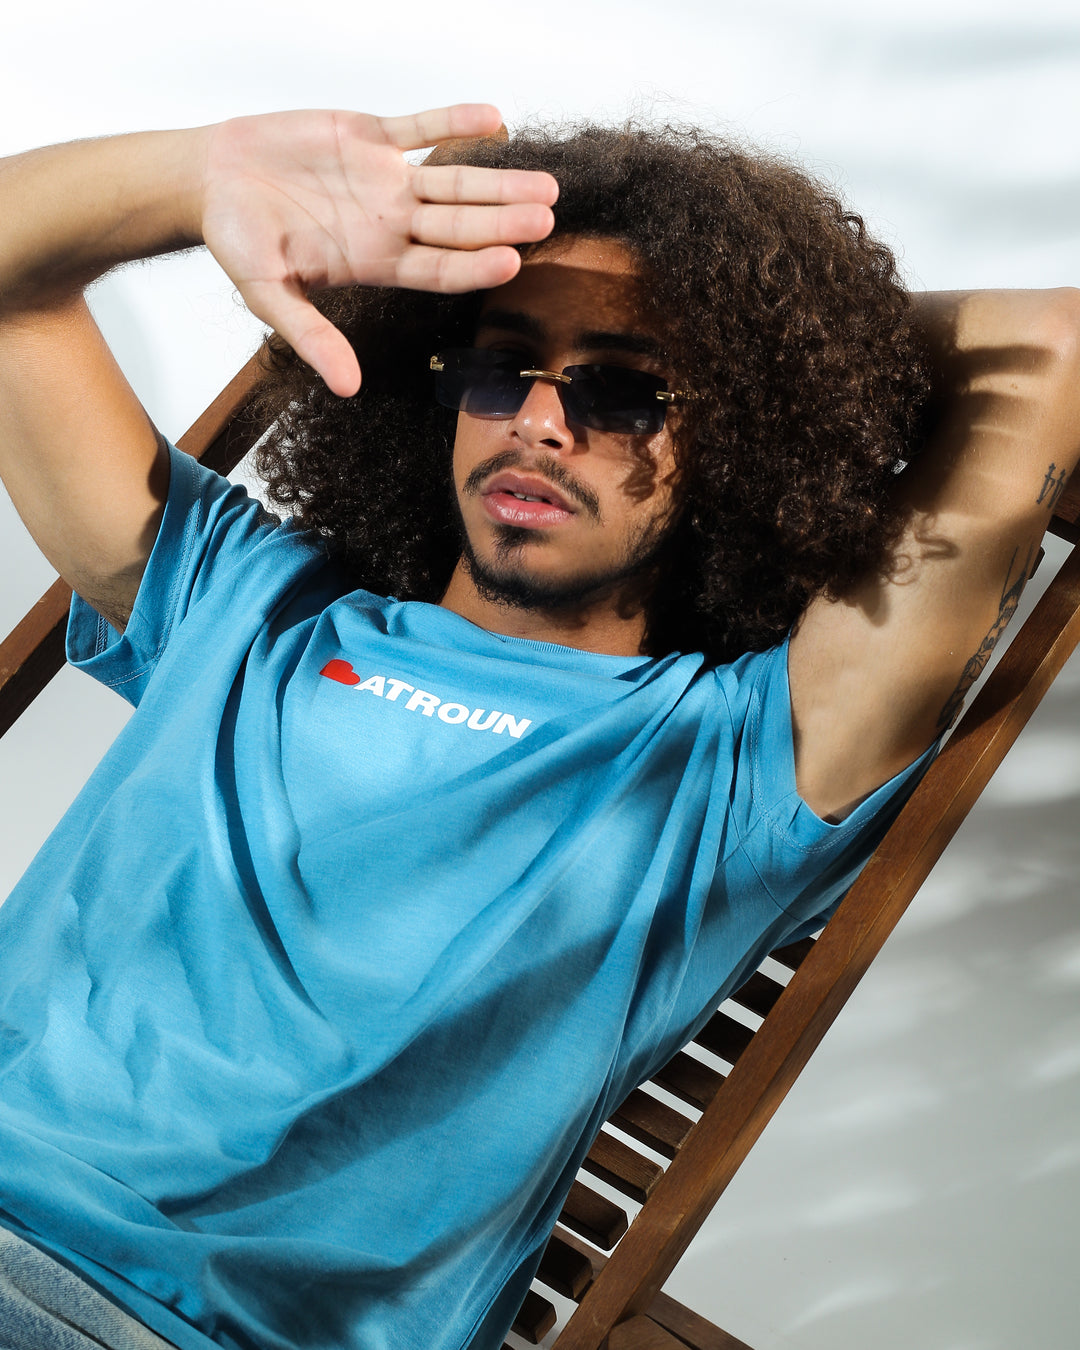 Young adult male wearing blue T-shirt with Batroun written in white and printed in silkscreen and the B is replaced with a red heart. He is laying on a wood chair and wearing sunglasses.